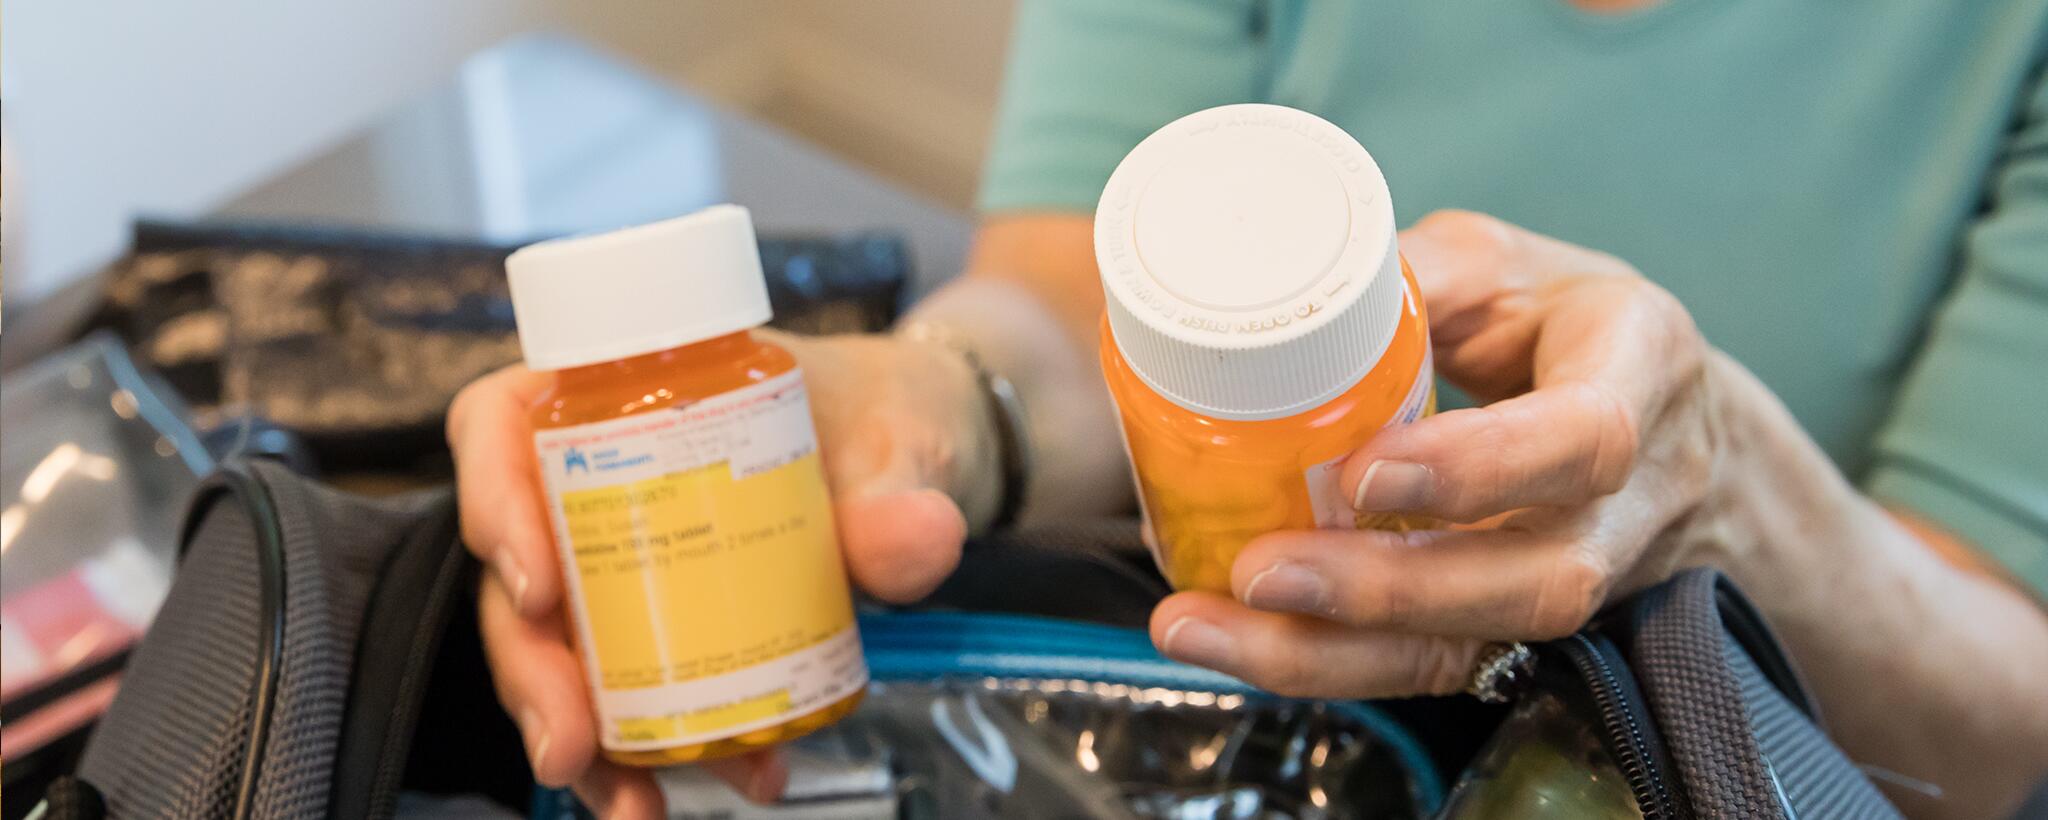 A woman's hands holding two bottles of perscription medications